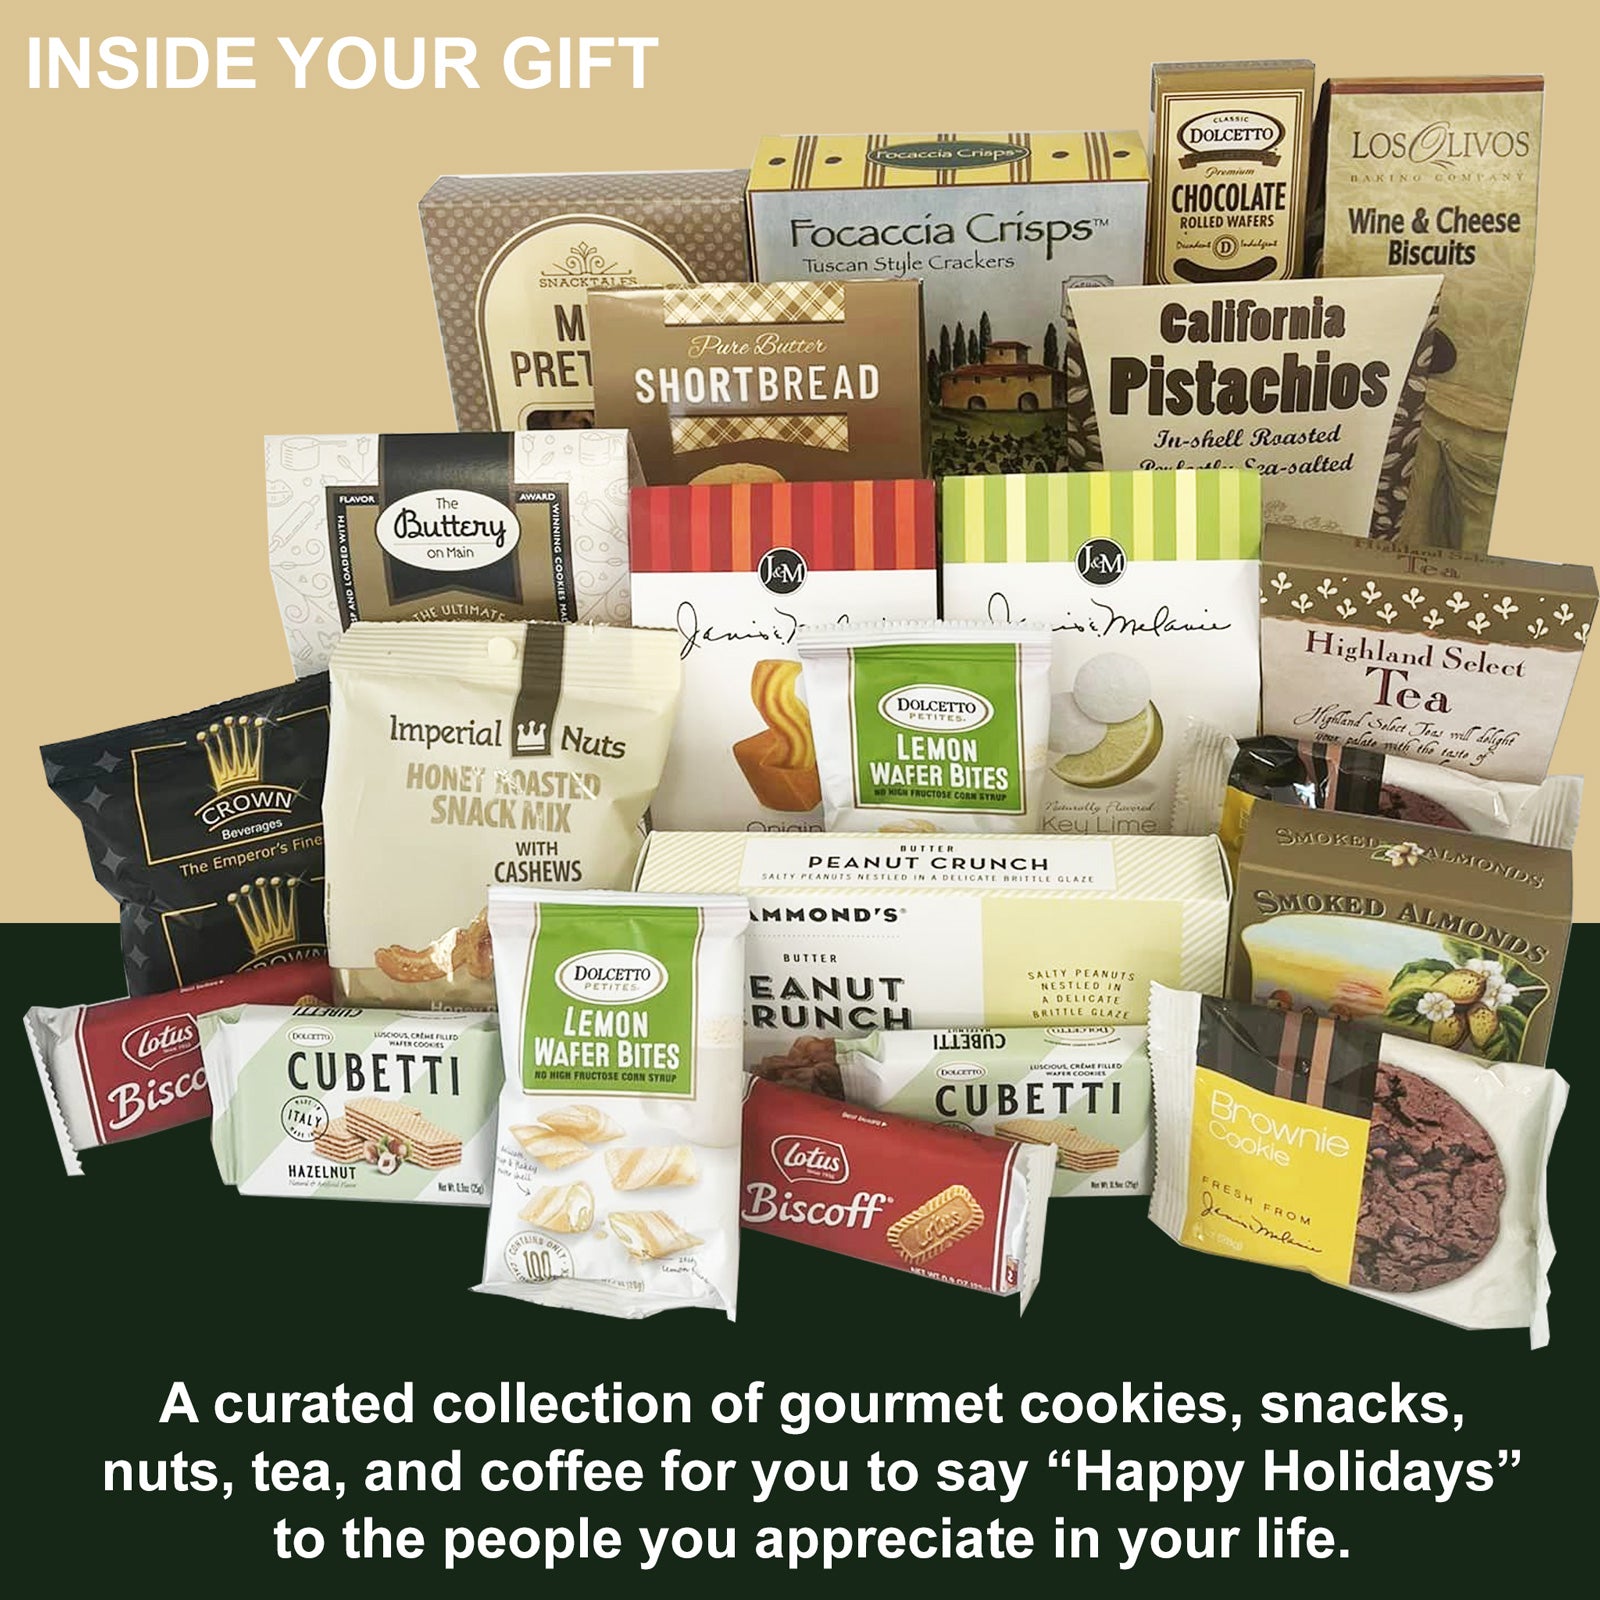 Grand Gourmet Christmas Gift Basket for Men, Women, Friends, Family, Business Includes Christmas Card and Personal Note